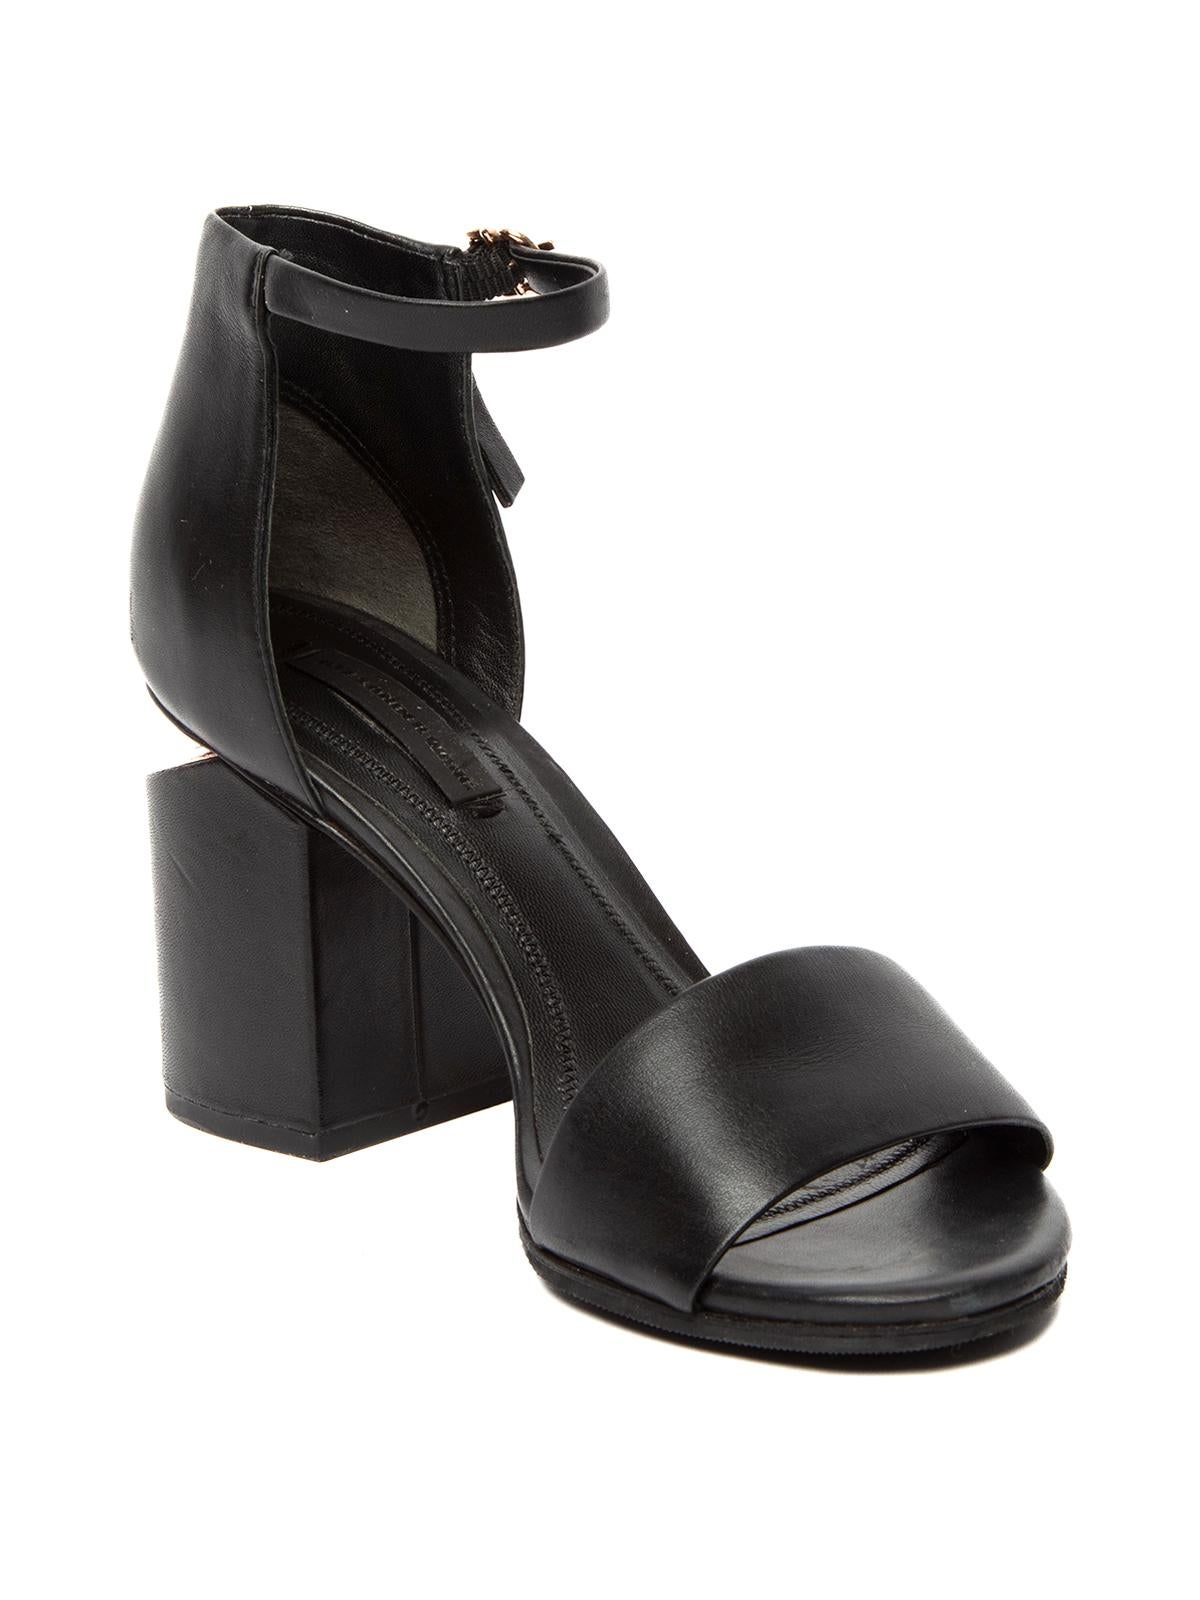 CONDITION is Fair. Wear to leather is evident. Wear to insole and outsole, faded leather on straps, and scratches are evident on this used Alexander Wang designer resale item. Details Abby style collection Black Leather Sandal style Open toe heel